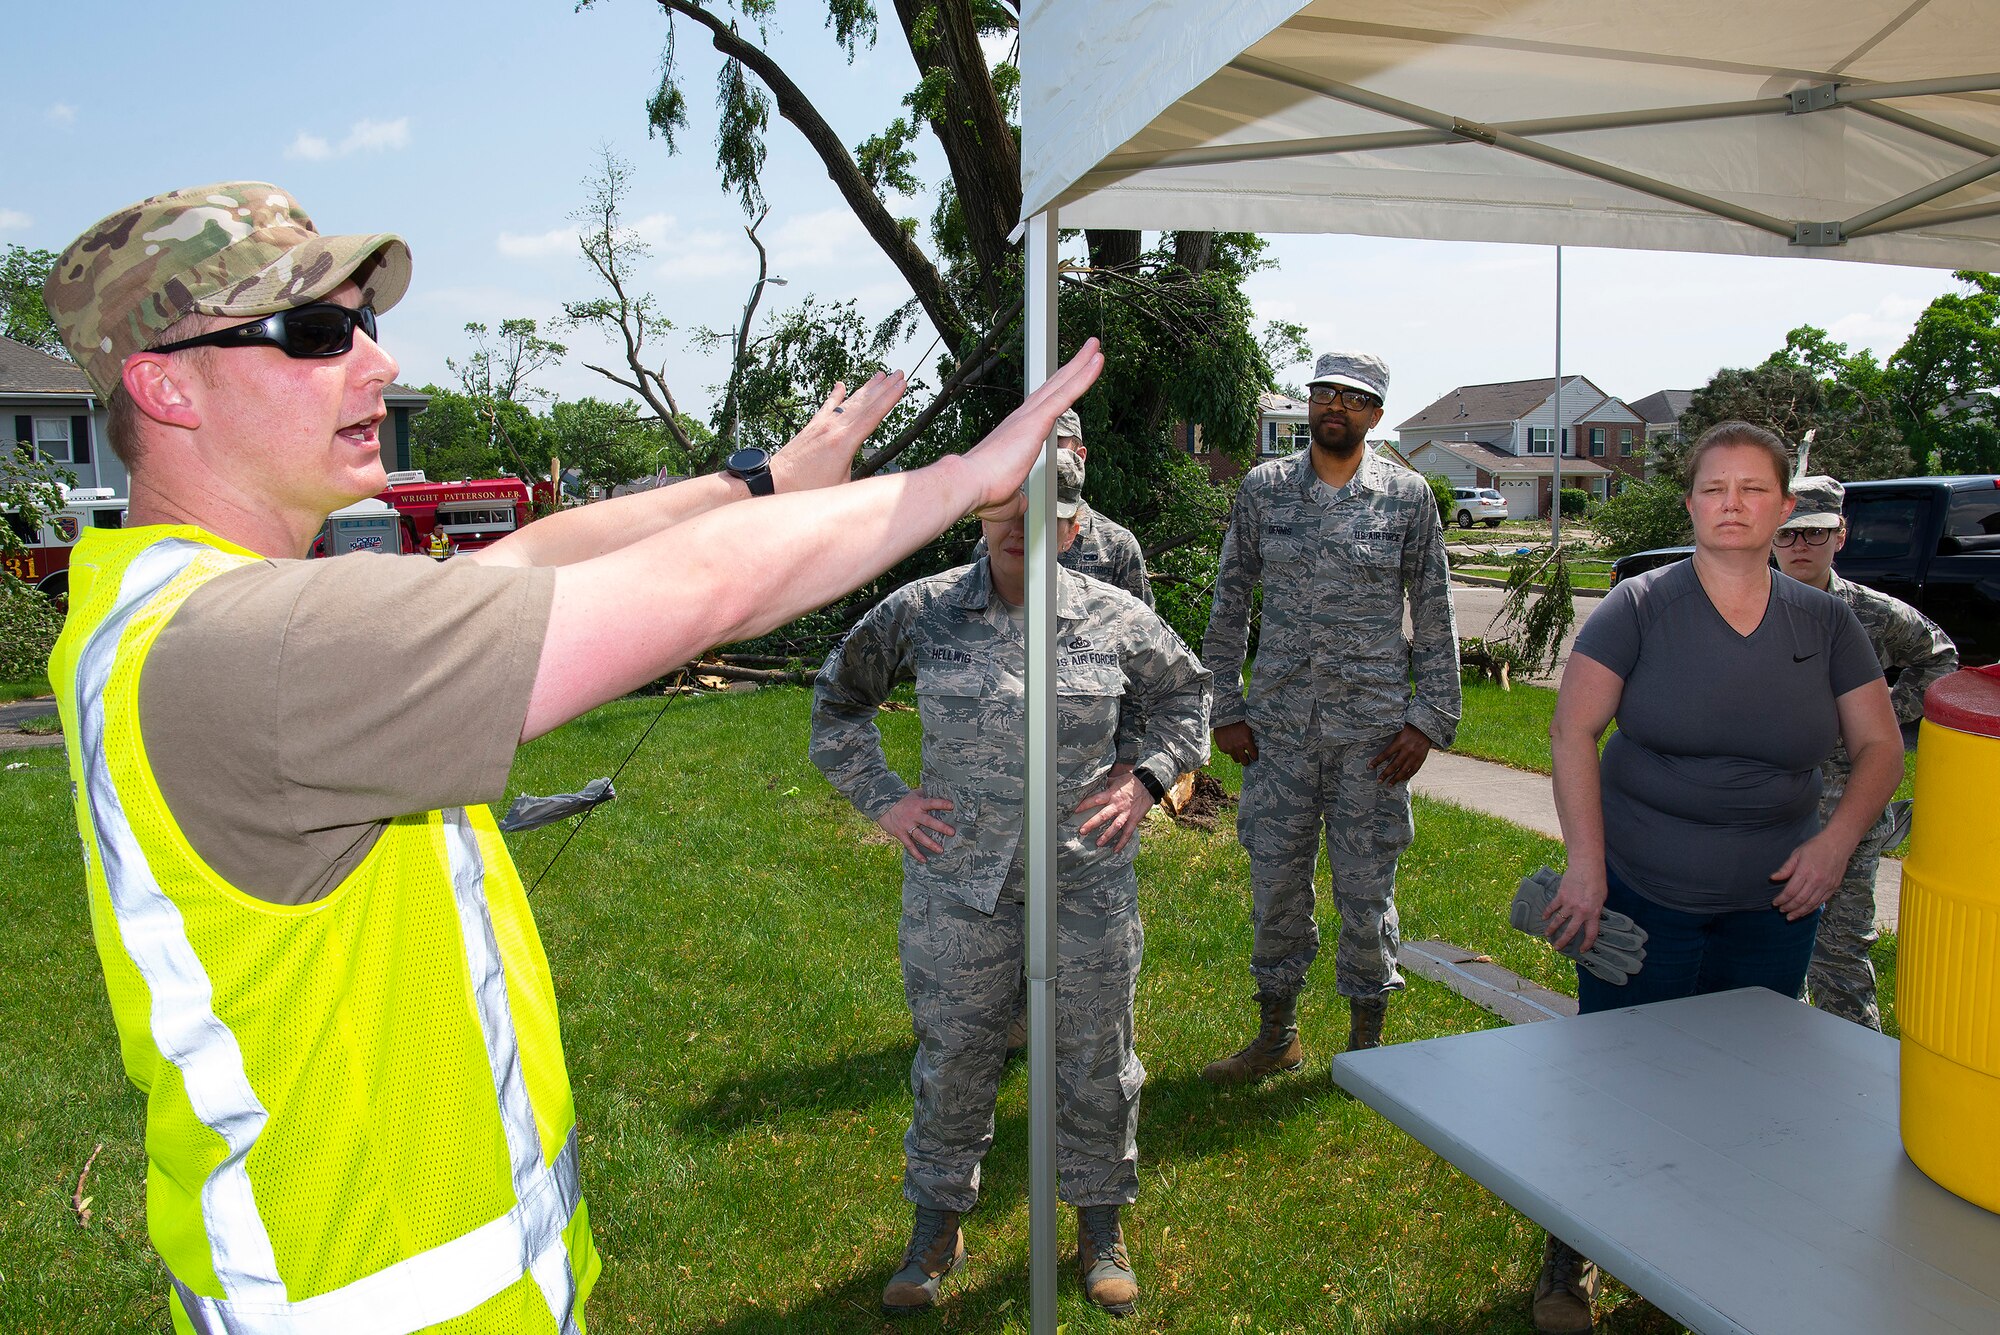 Senior Master Sgt. Christopher Blasengame, 88th Air Base Wing safety supervisor, briefs volunteers, May 28, 2019, before they go out to help clean up after a tornado came through damaging approximately 150 homes, at Wright-Patterson Air Force Base, Ohio. Volunteers and base emergency personnel worked to ensure everyone’s safety and begin the cleanup process. (U.S. Air Force photo by R.J. Oriez)